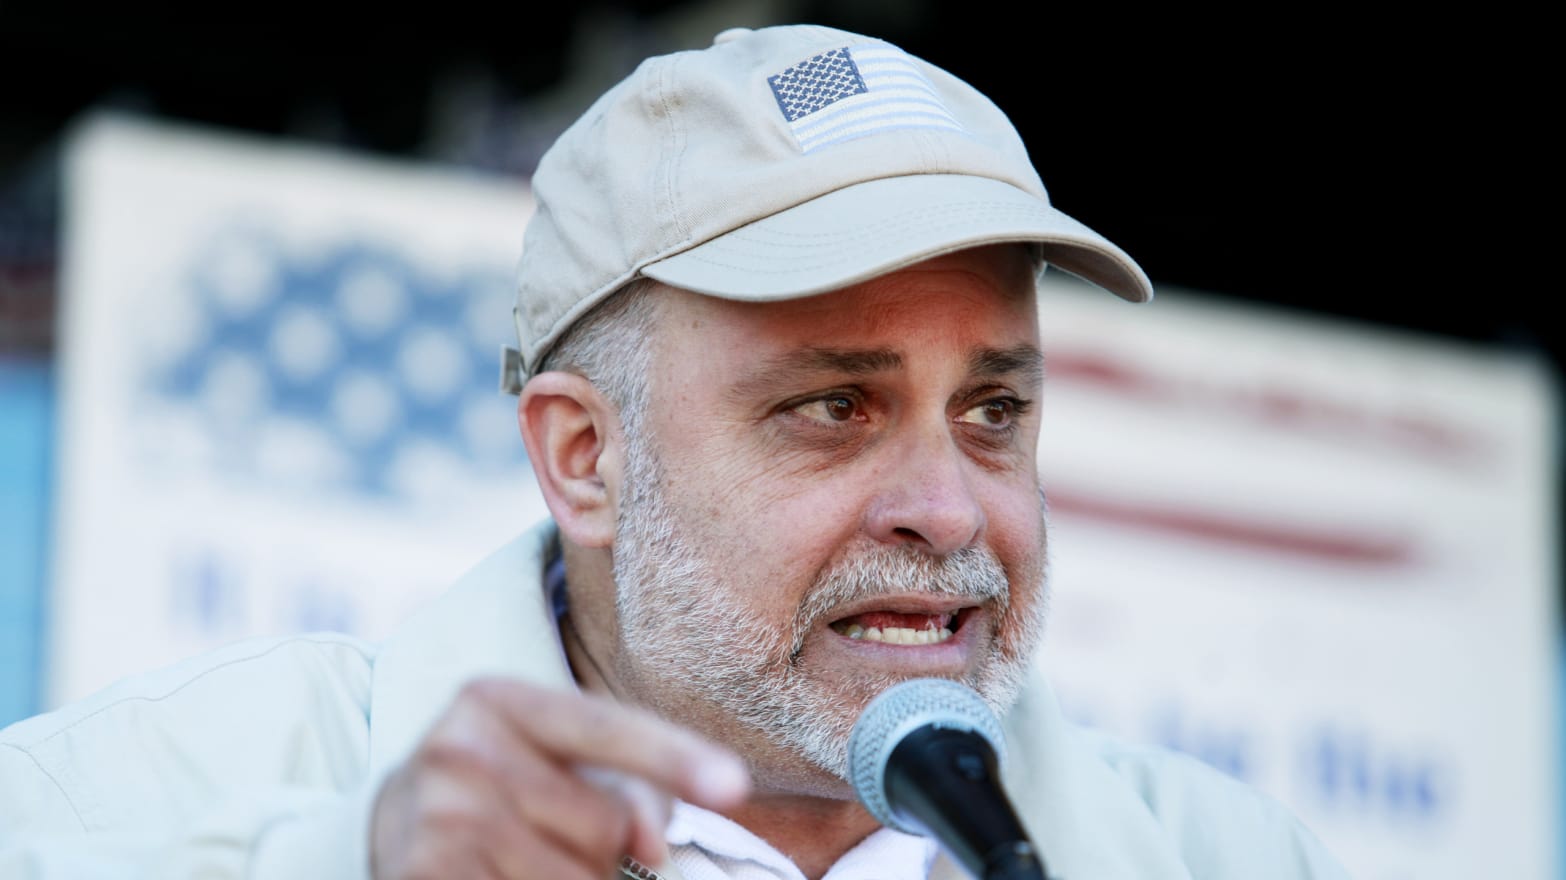 Mark Levin wearing a face cap with the flag of the United States as he speaks into a microphone